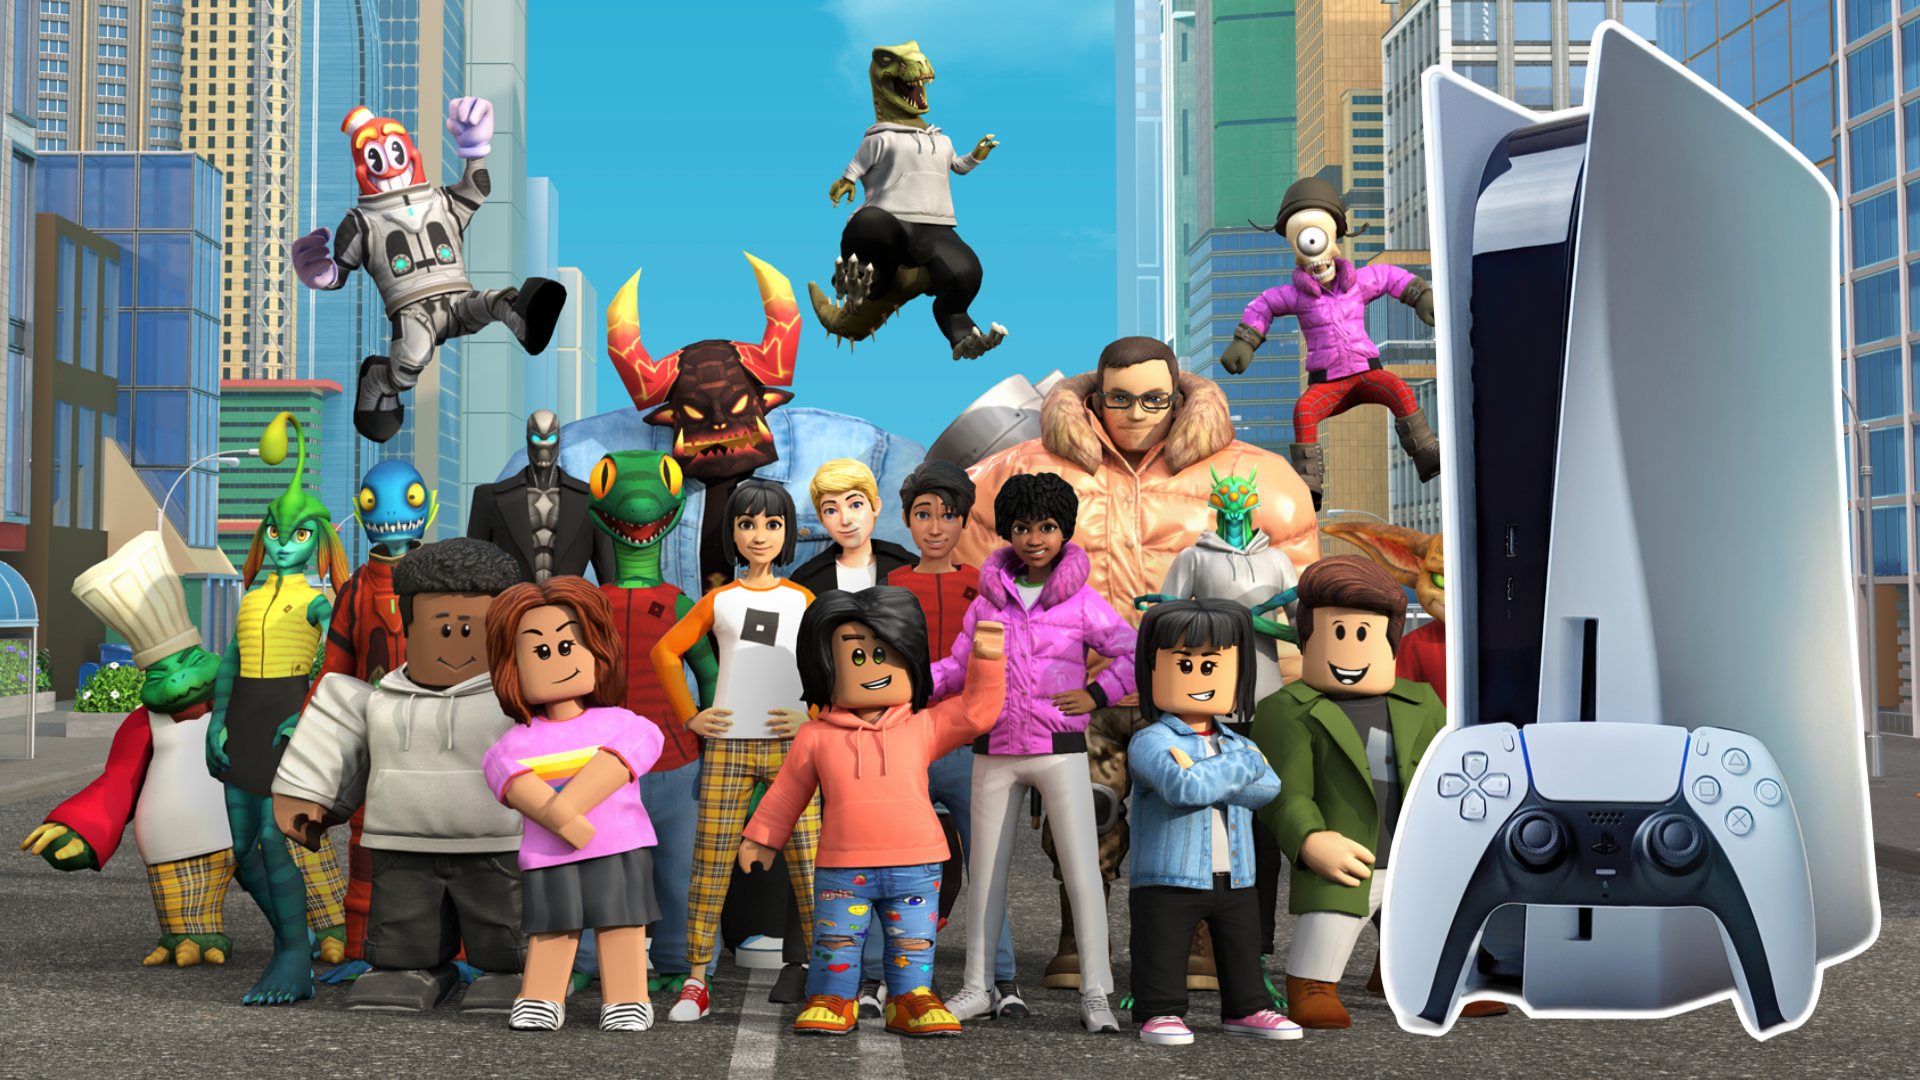 Roblox Xbox Exclusivity Ending with October PlayStation Release